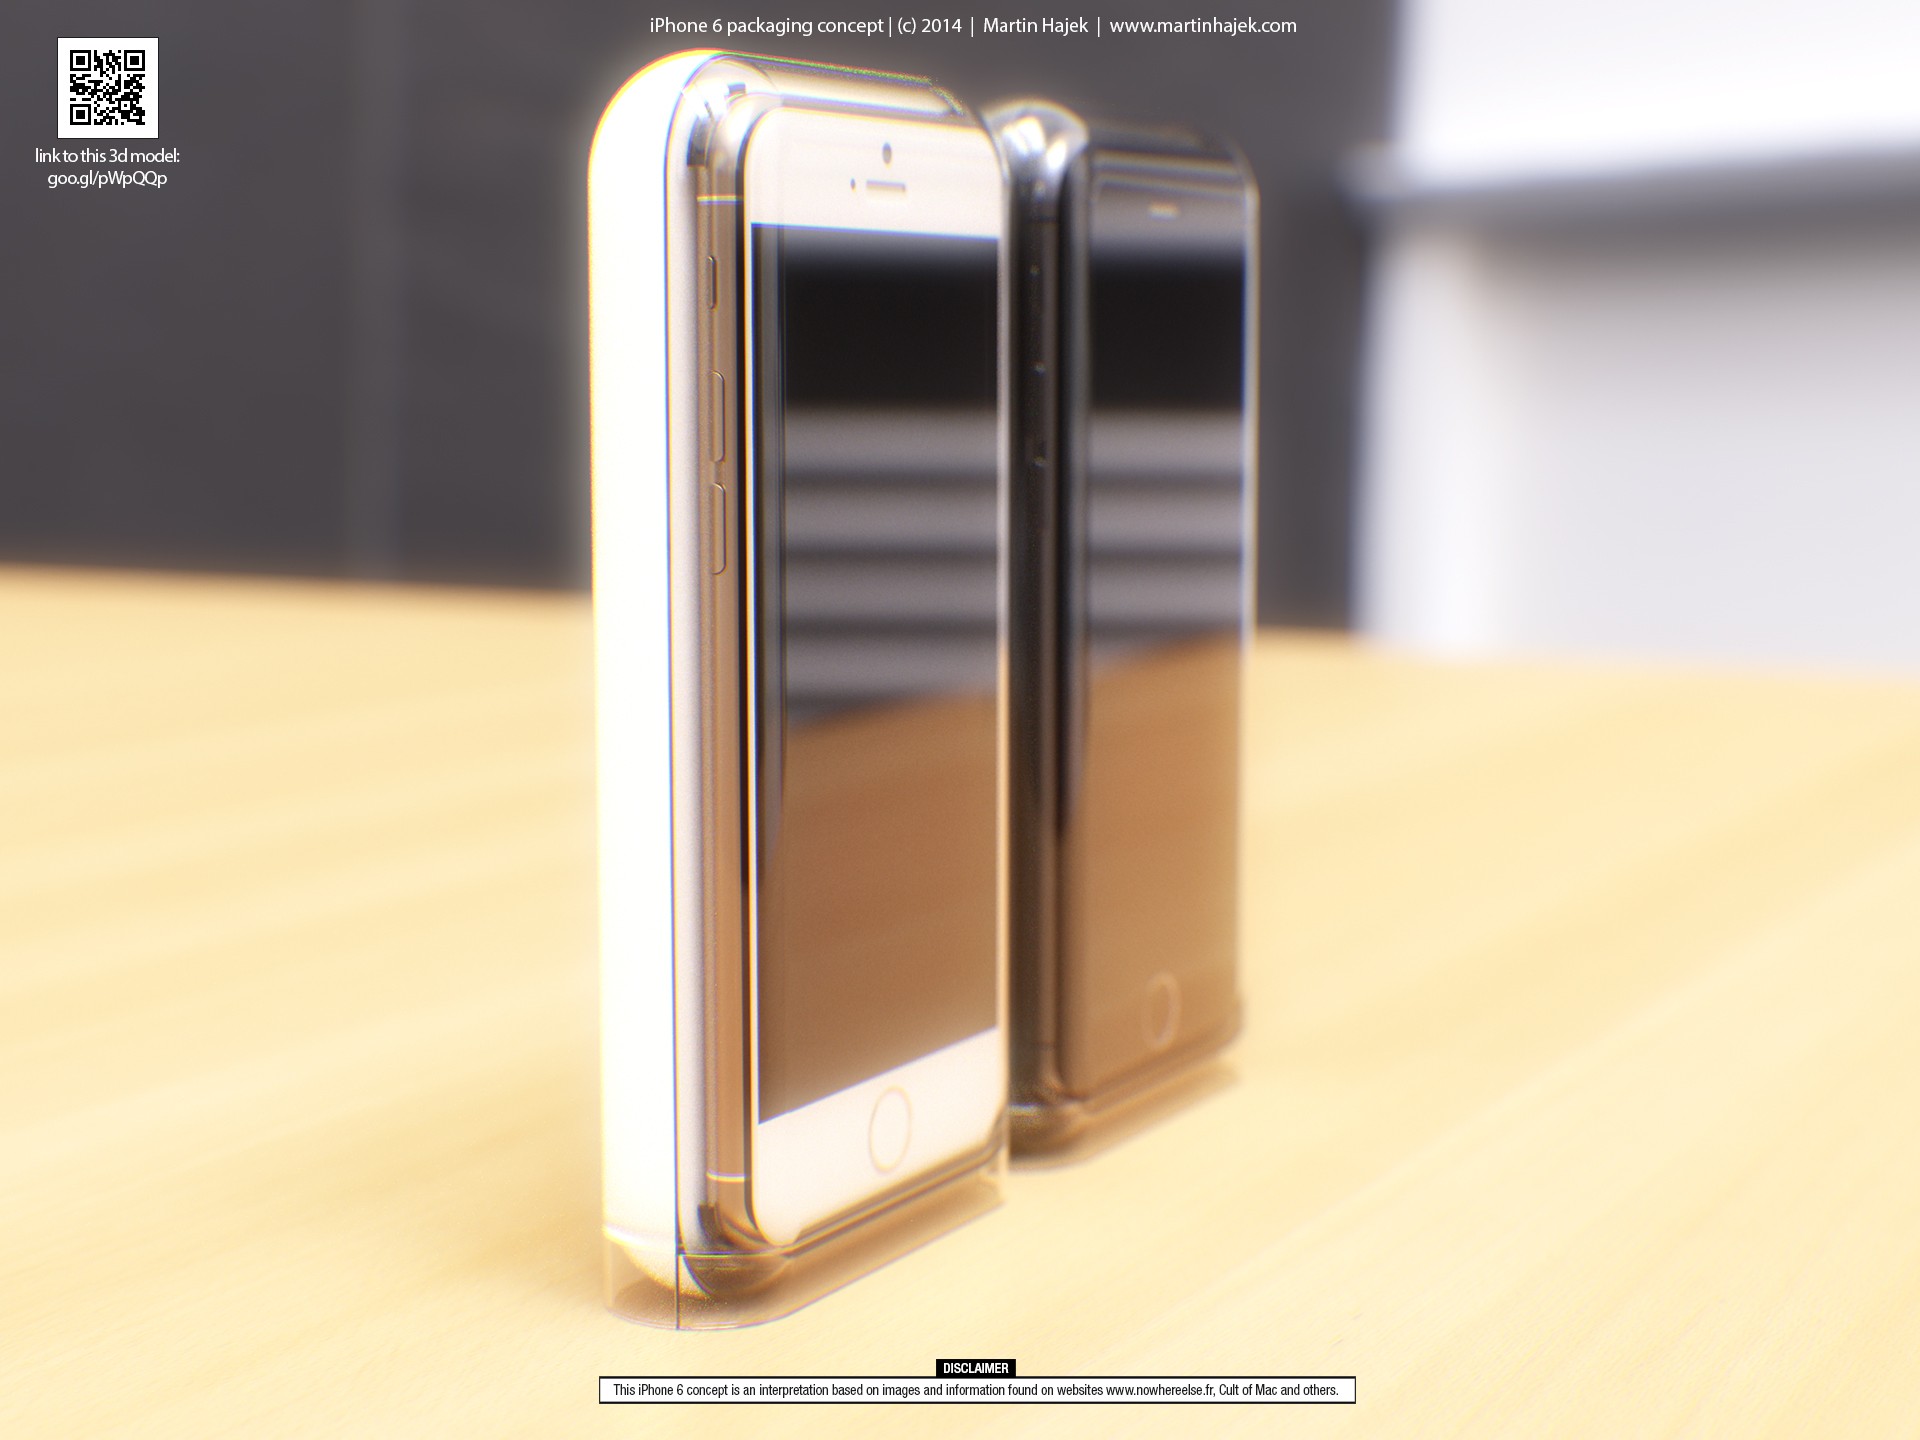 ... -Shows-How-The-iPhone-6-Unboxing-Will-Look-Like-Gallery-454565-6.jpg